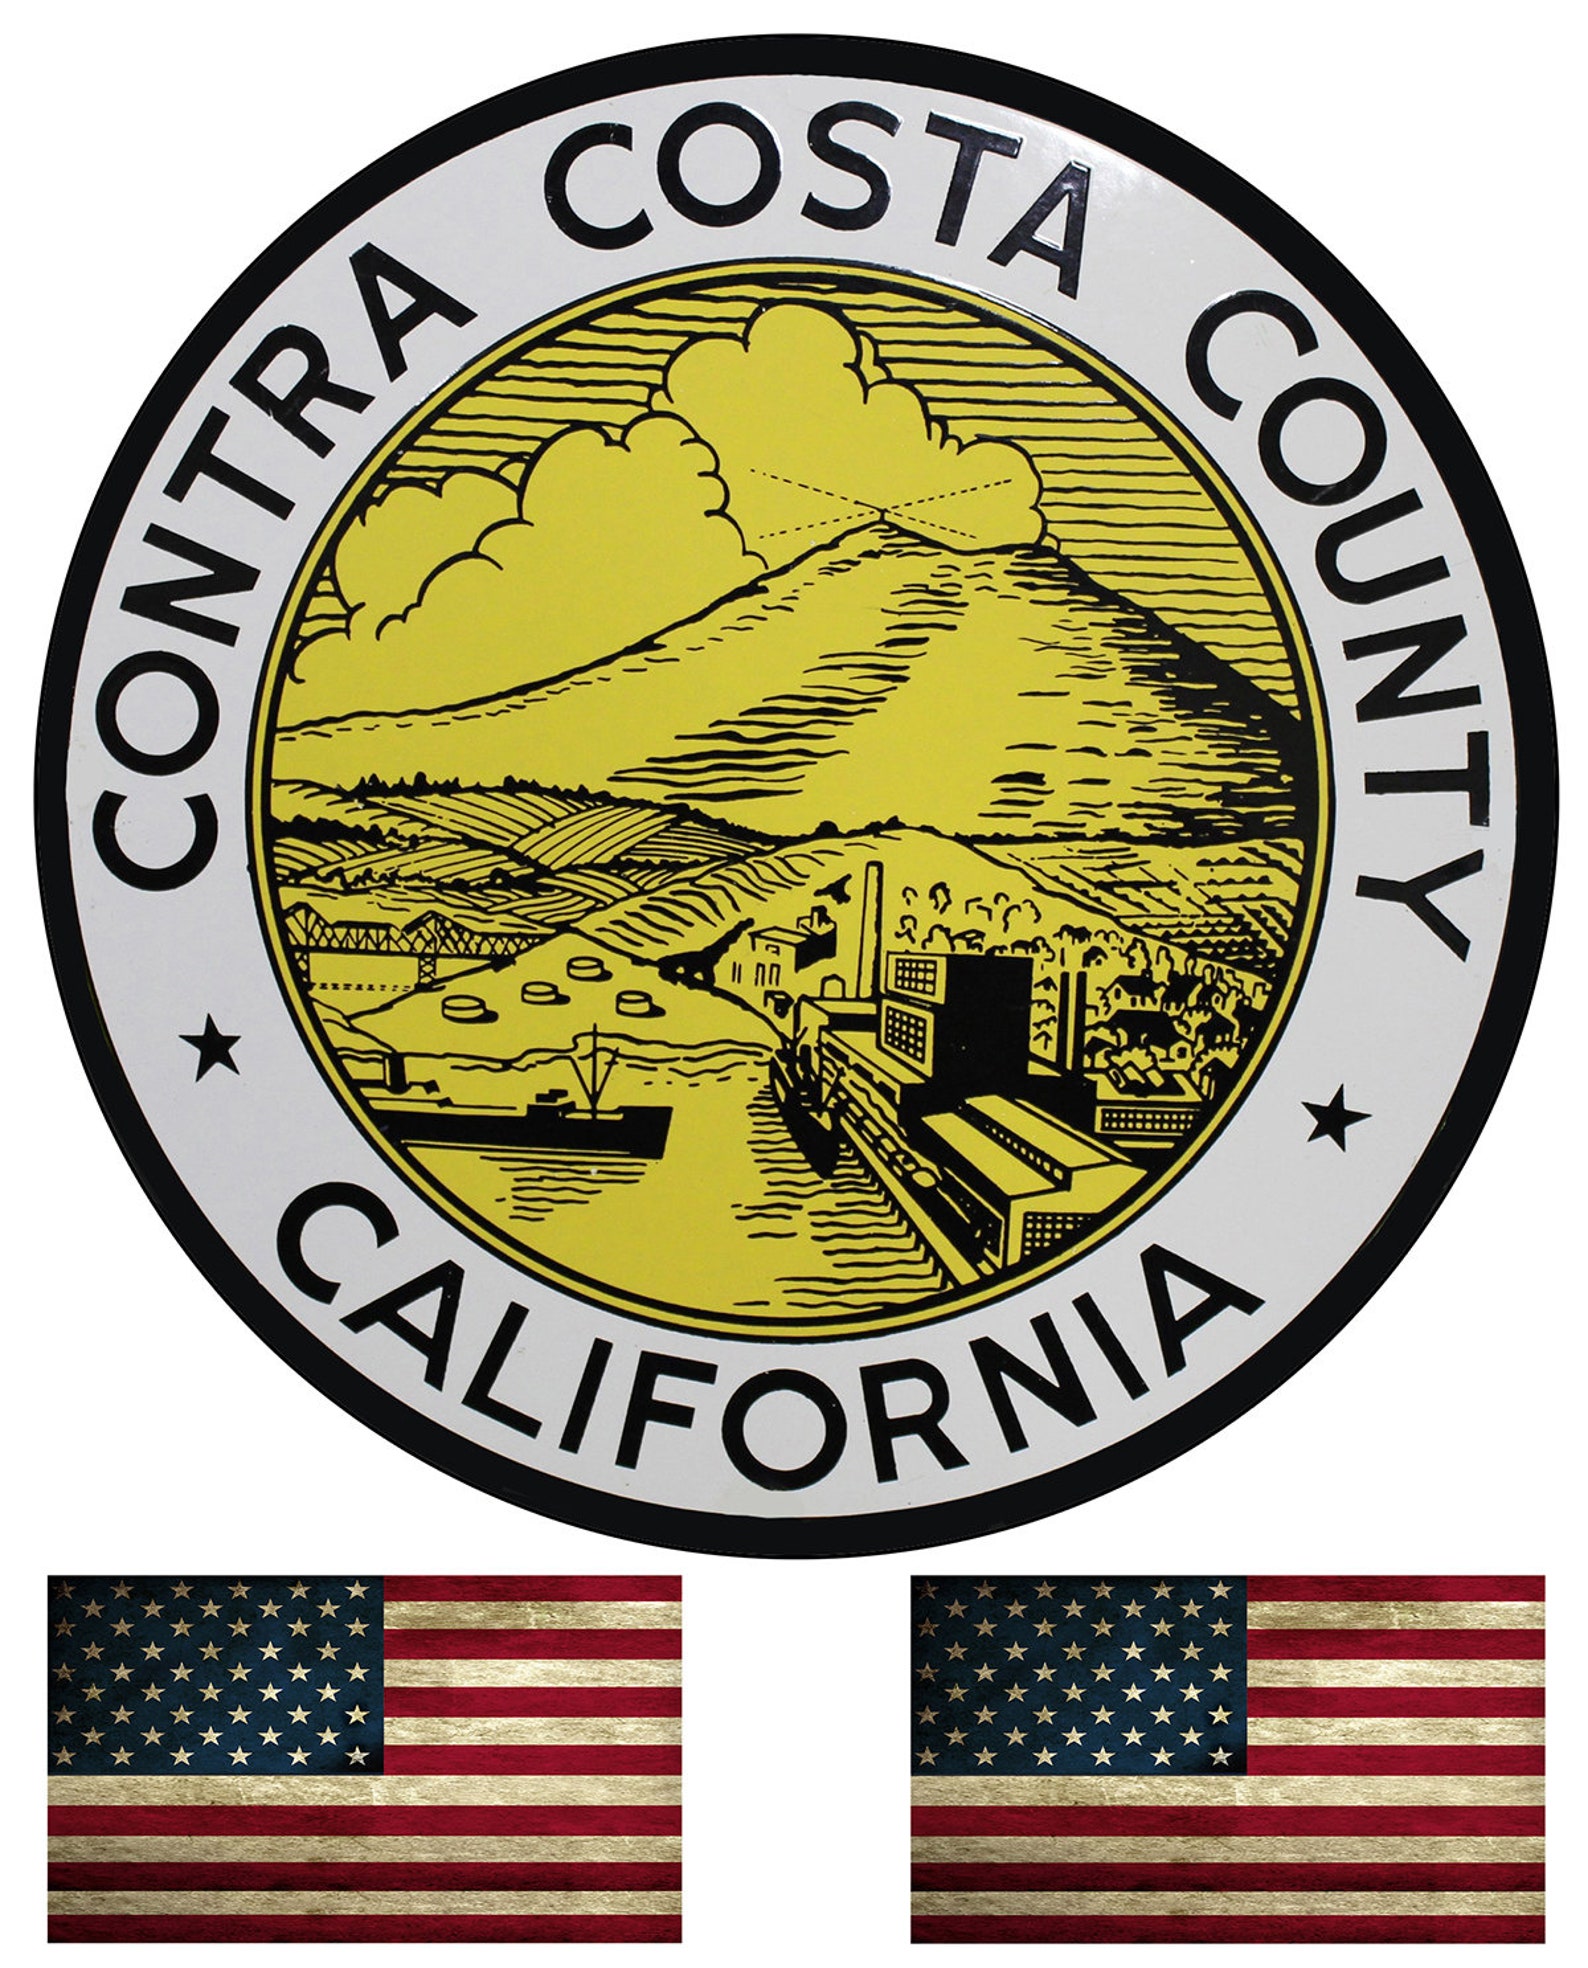 contra-costa-county-california-sign-advertisement-old-vintage-etsy